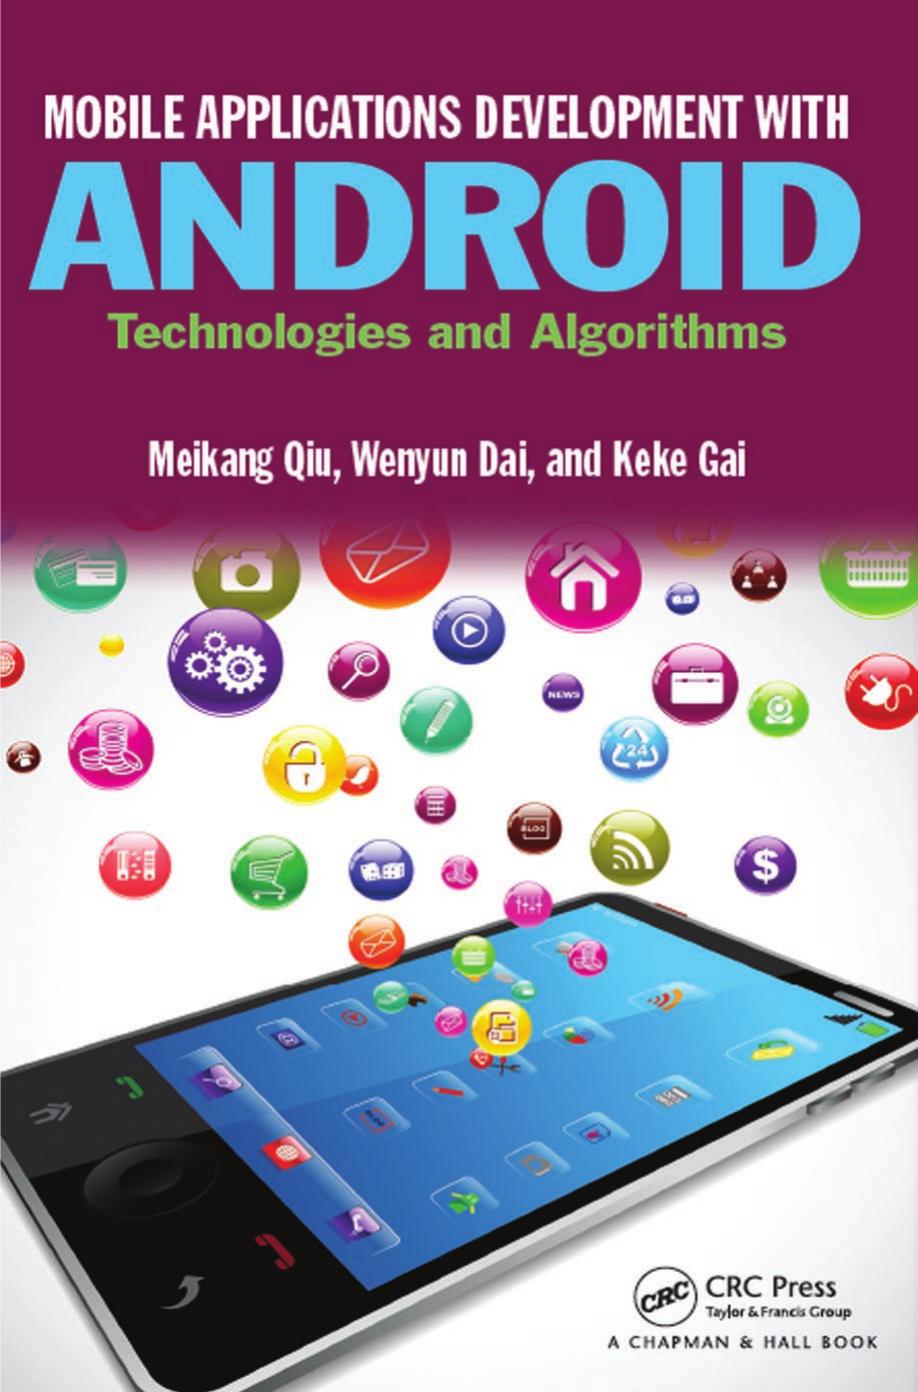 Mobile applications development with Android  technologies andalgorithms 2017